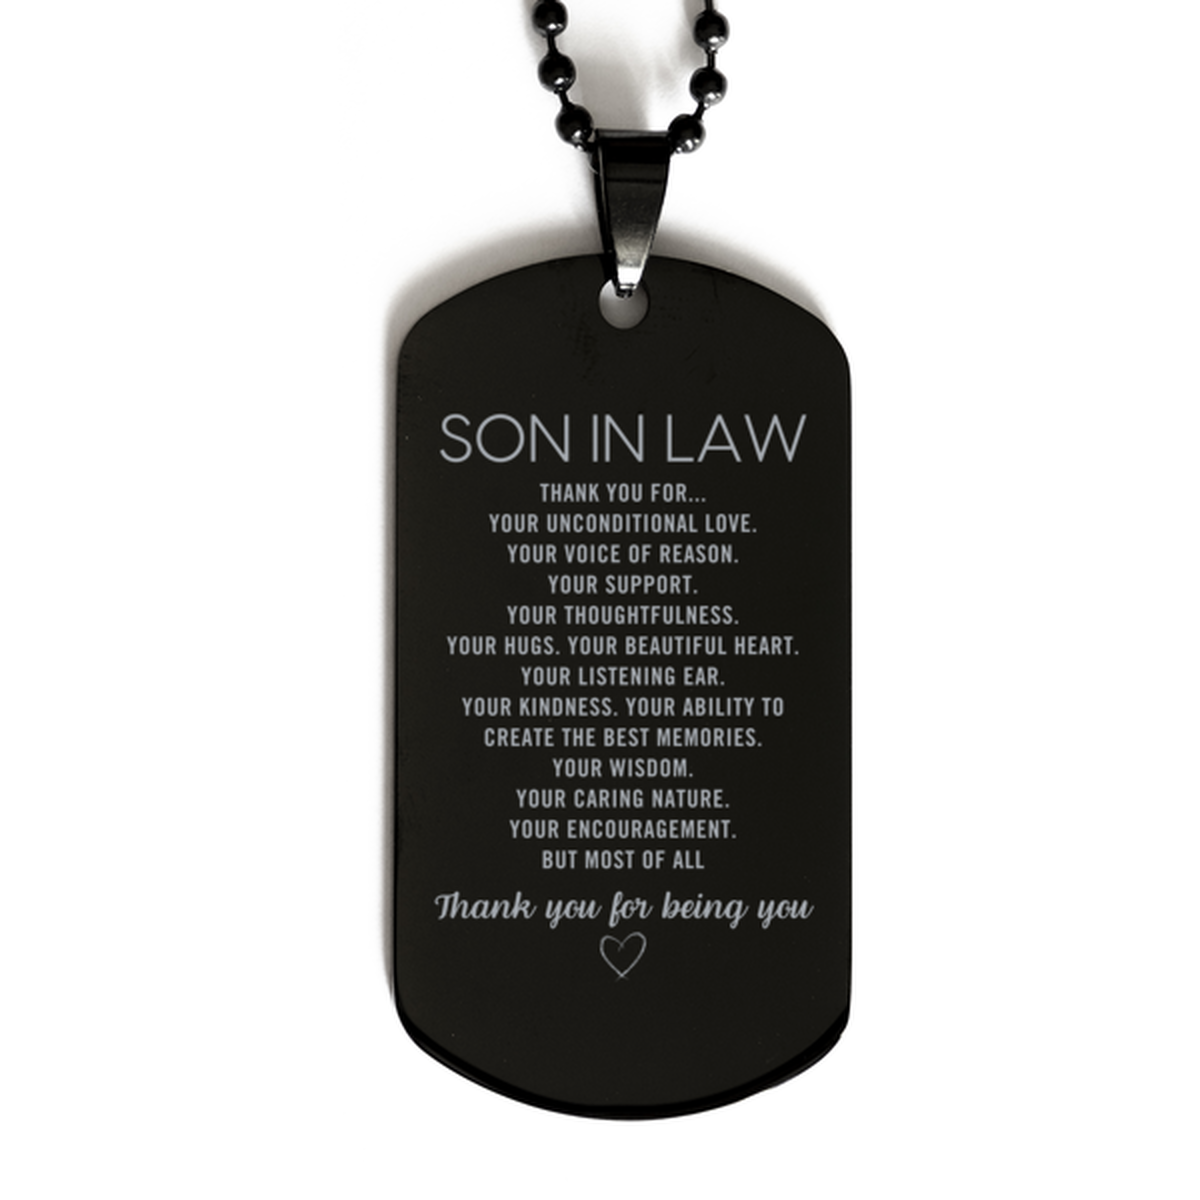 Son In Law Black Dog Tag Custom, Engraved Gifts For Son In Law Christmas Graduation Birthday Gifts for Men Women Son In Law Thank you for Your unconditional love